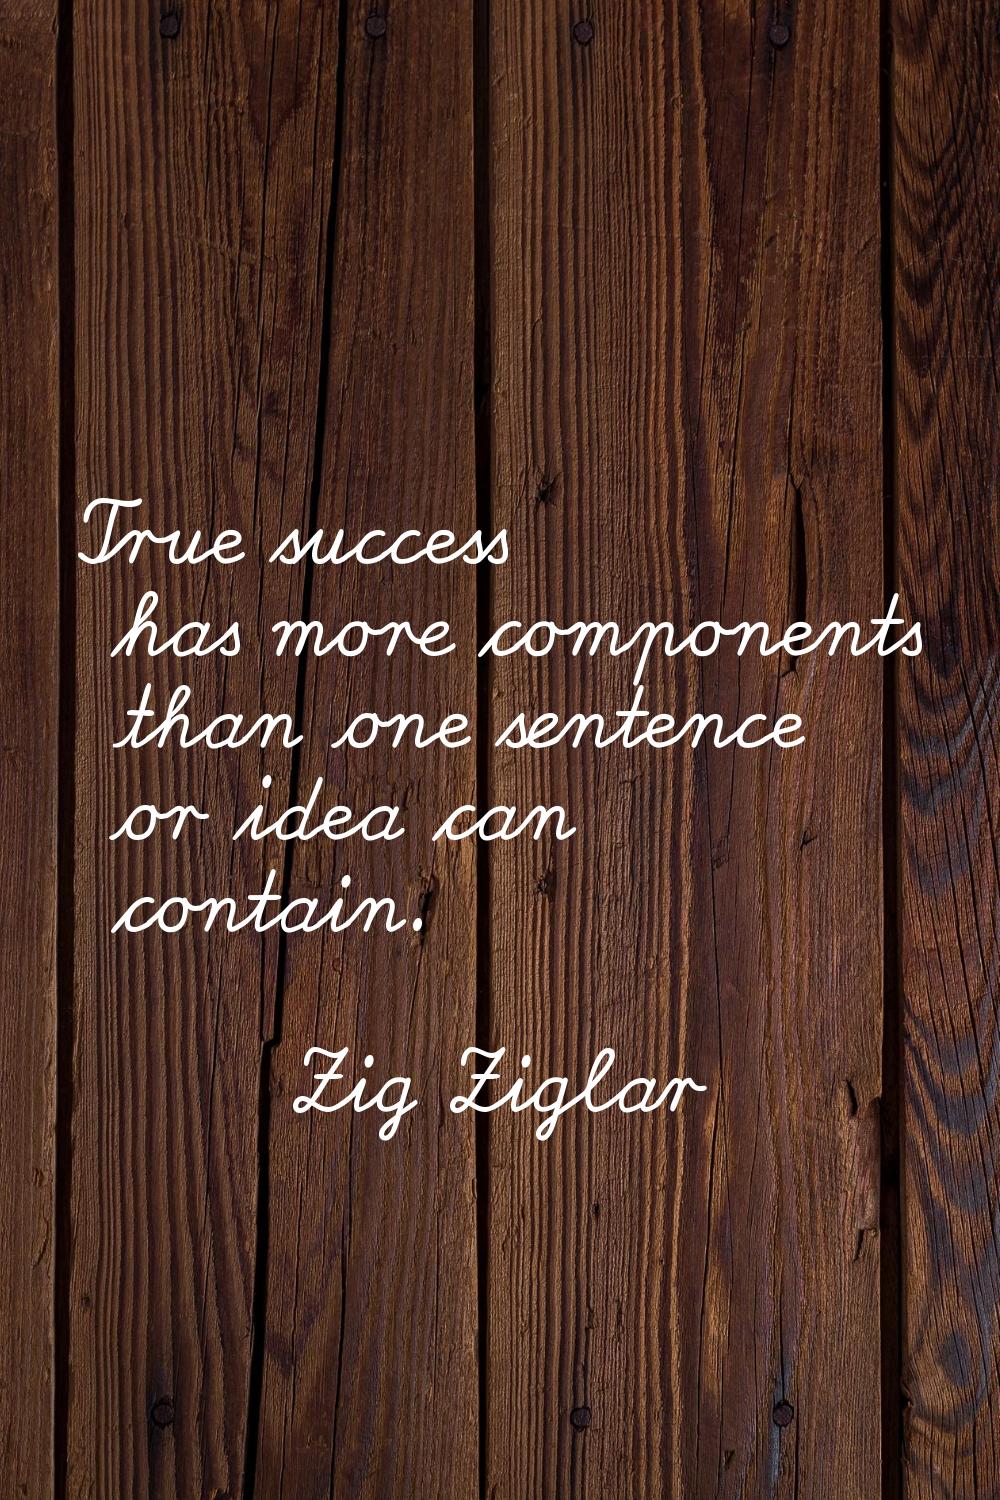 True success has more components than one sentence or idea can contain.